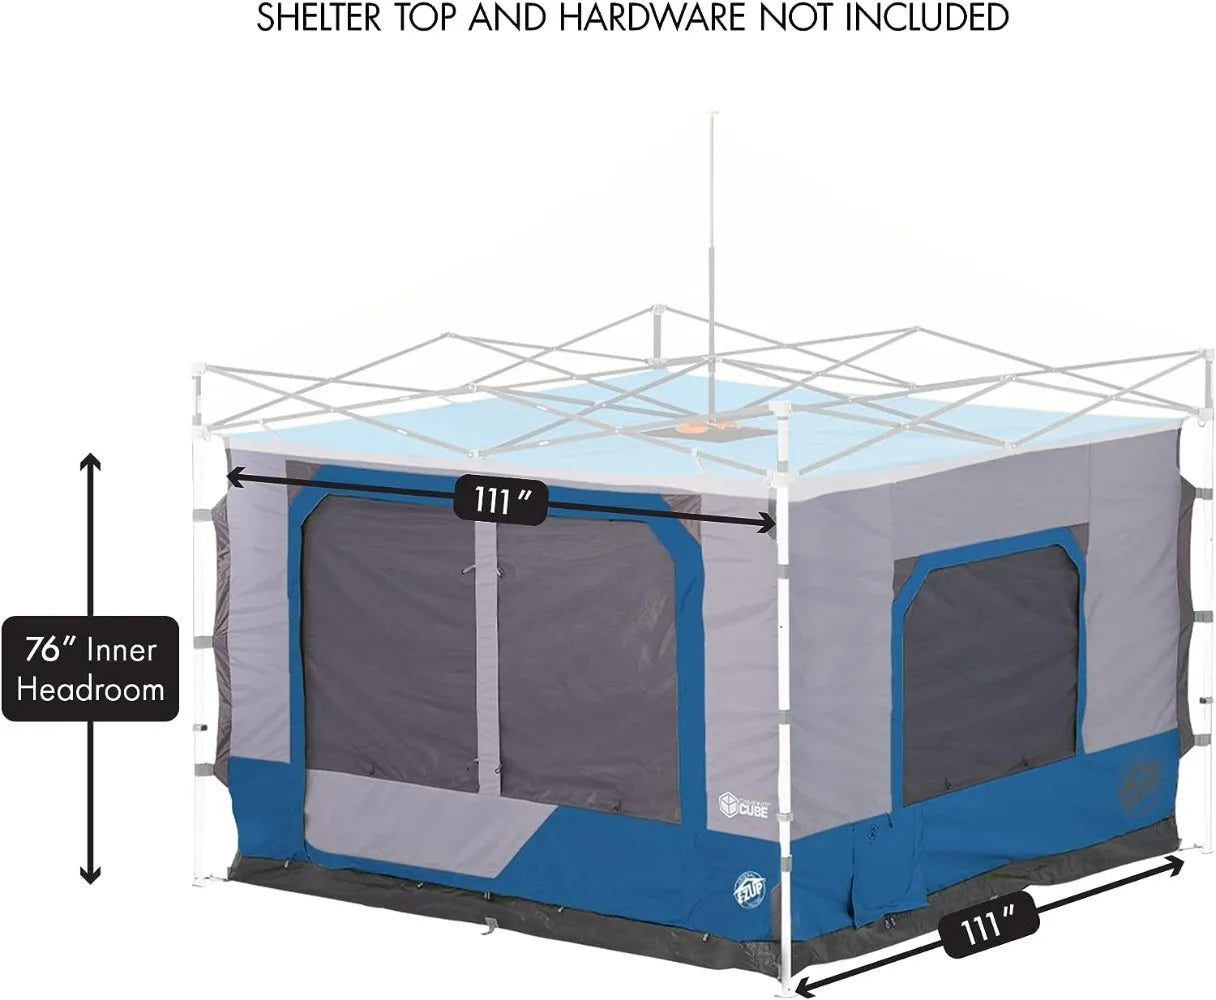 Camping Cube 6.4, Converts 10' Straight Leg Canopy into Tent, Royal Blue (Canopy/Shelter NOT included)